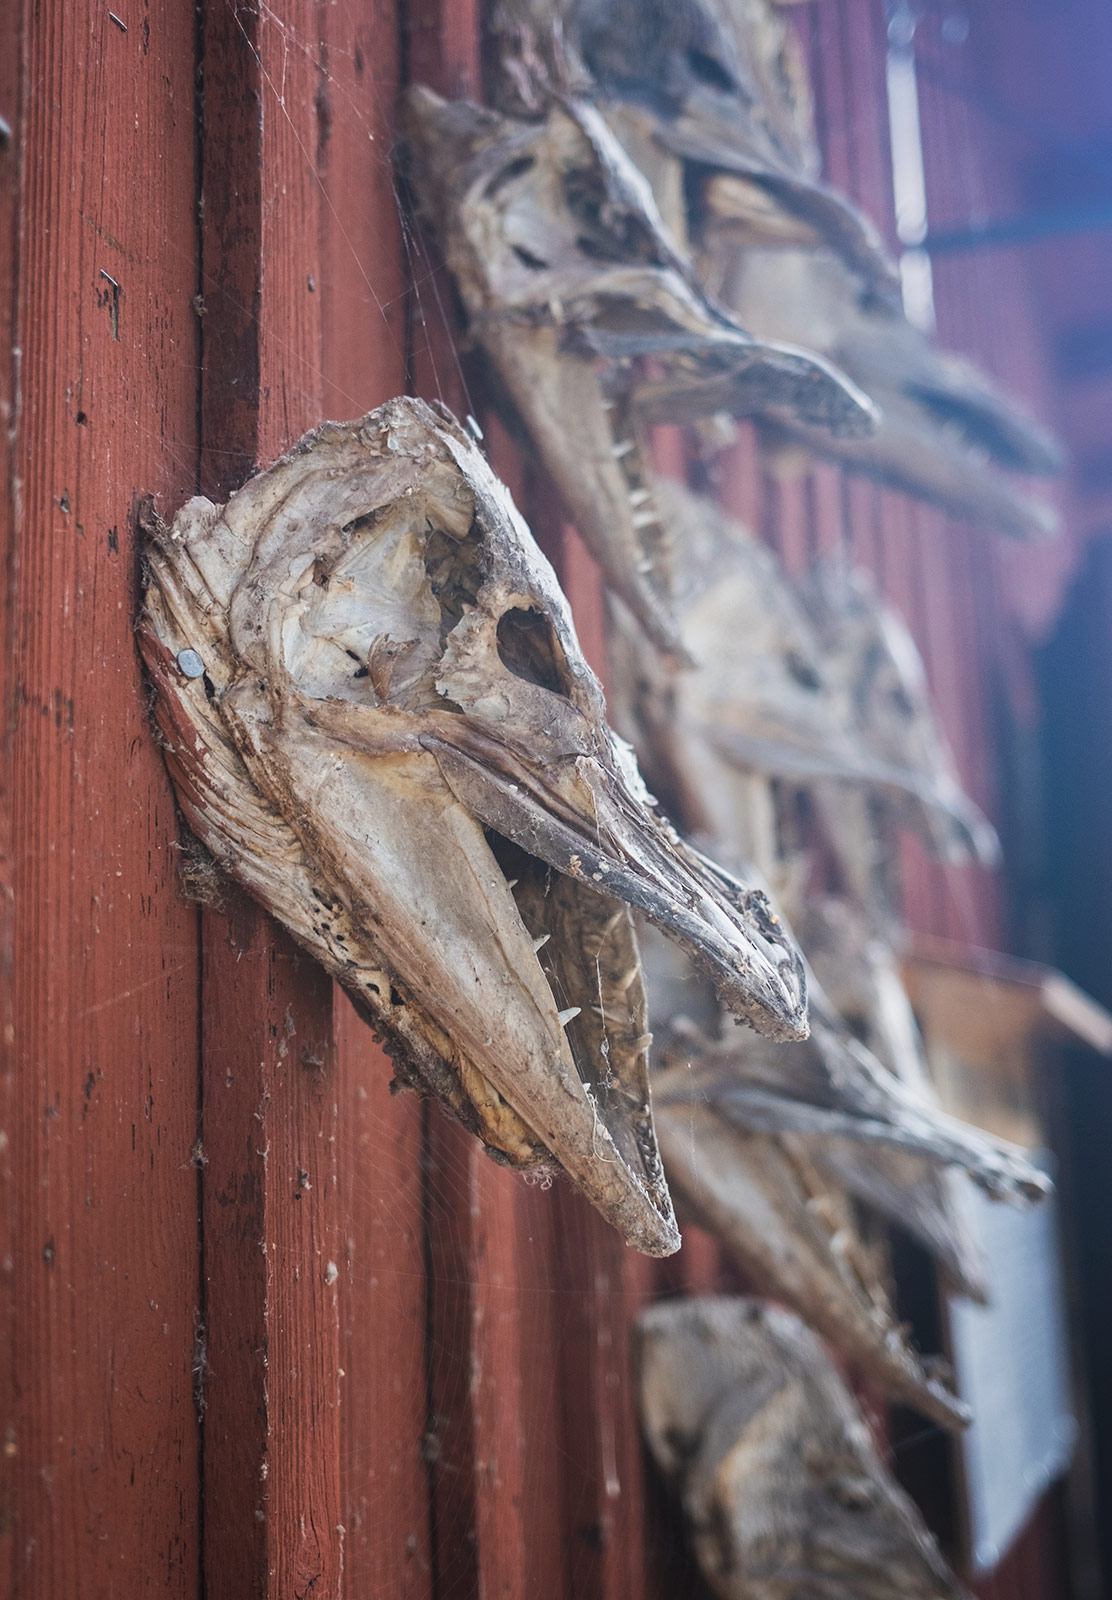 Catfish heads nailed to wooden wall